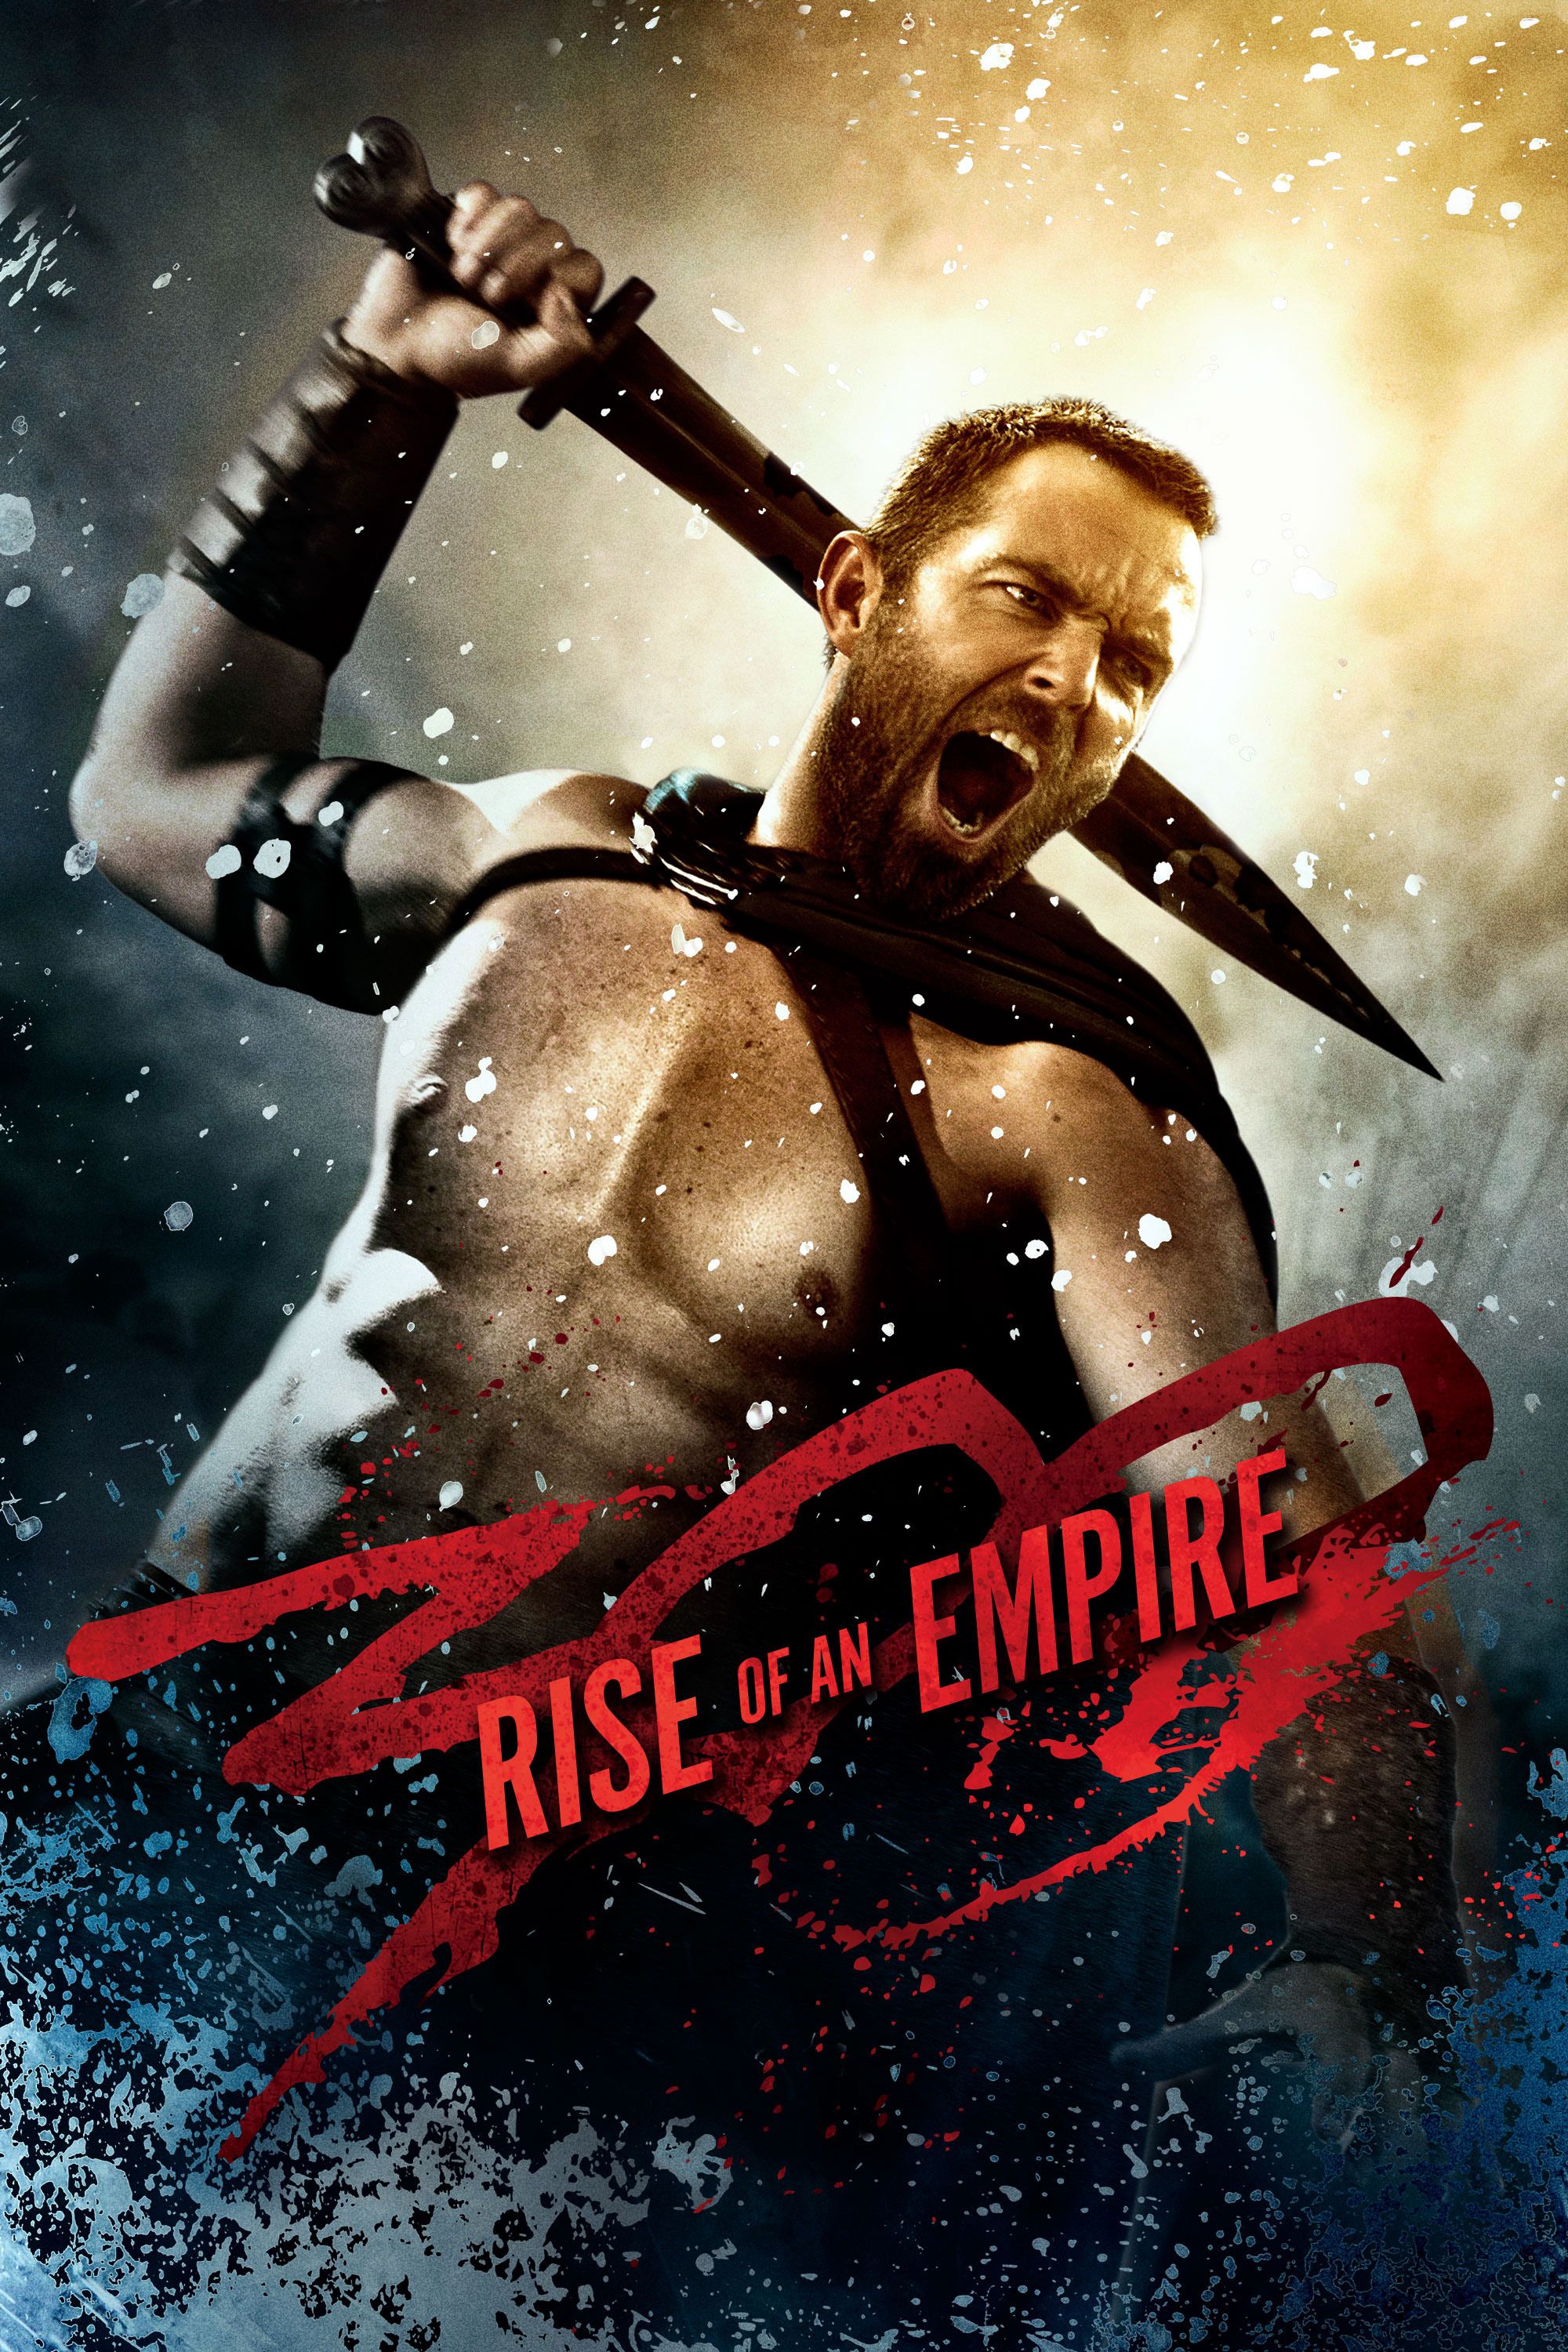 300 rise of an empire movie wiki